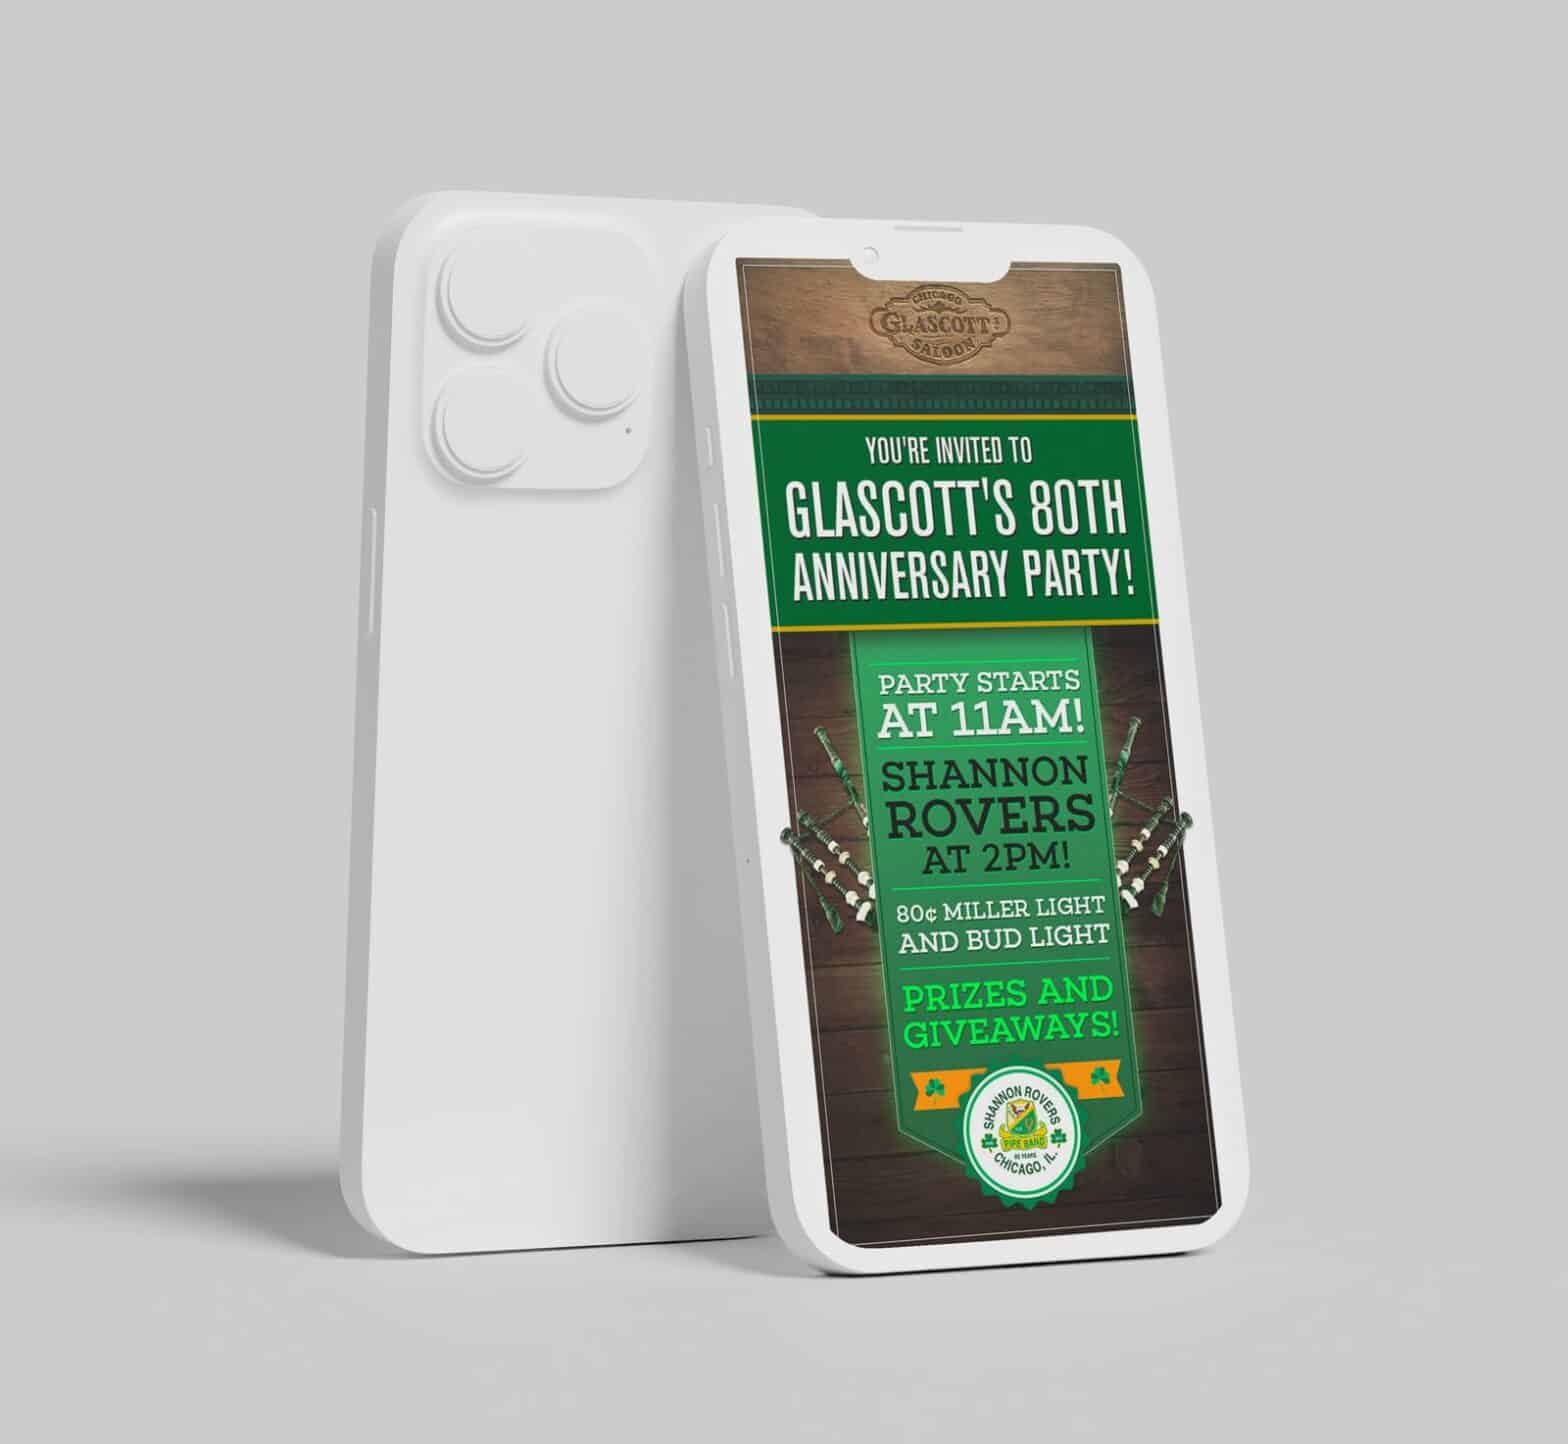 glascott's client product design on mobile devices